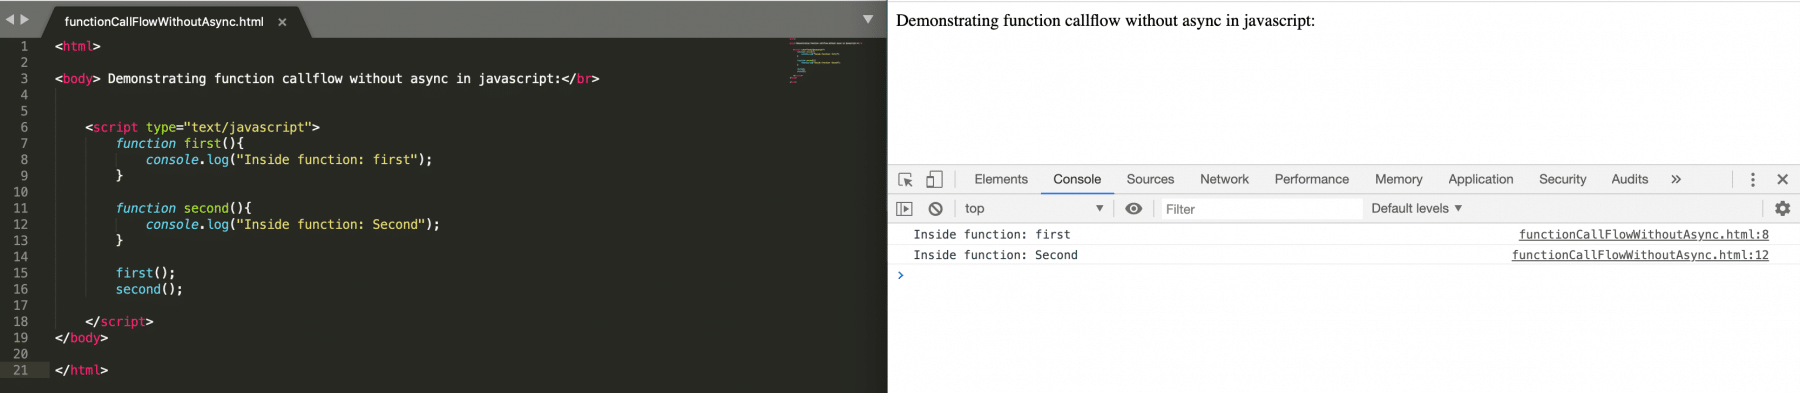 Function call flows without async functions in JavaScript